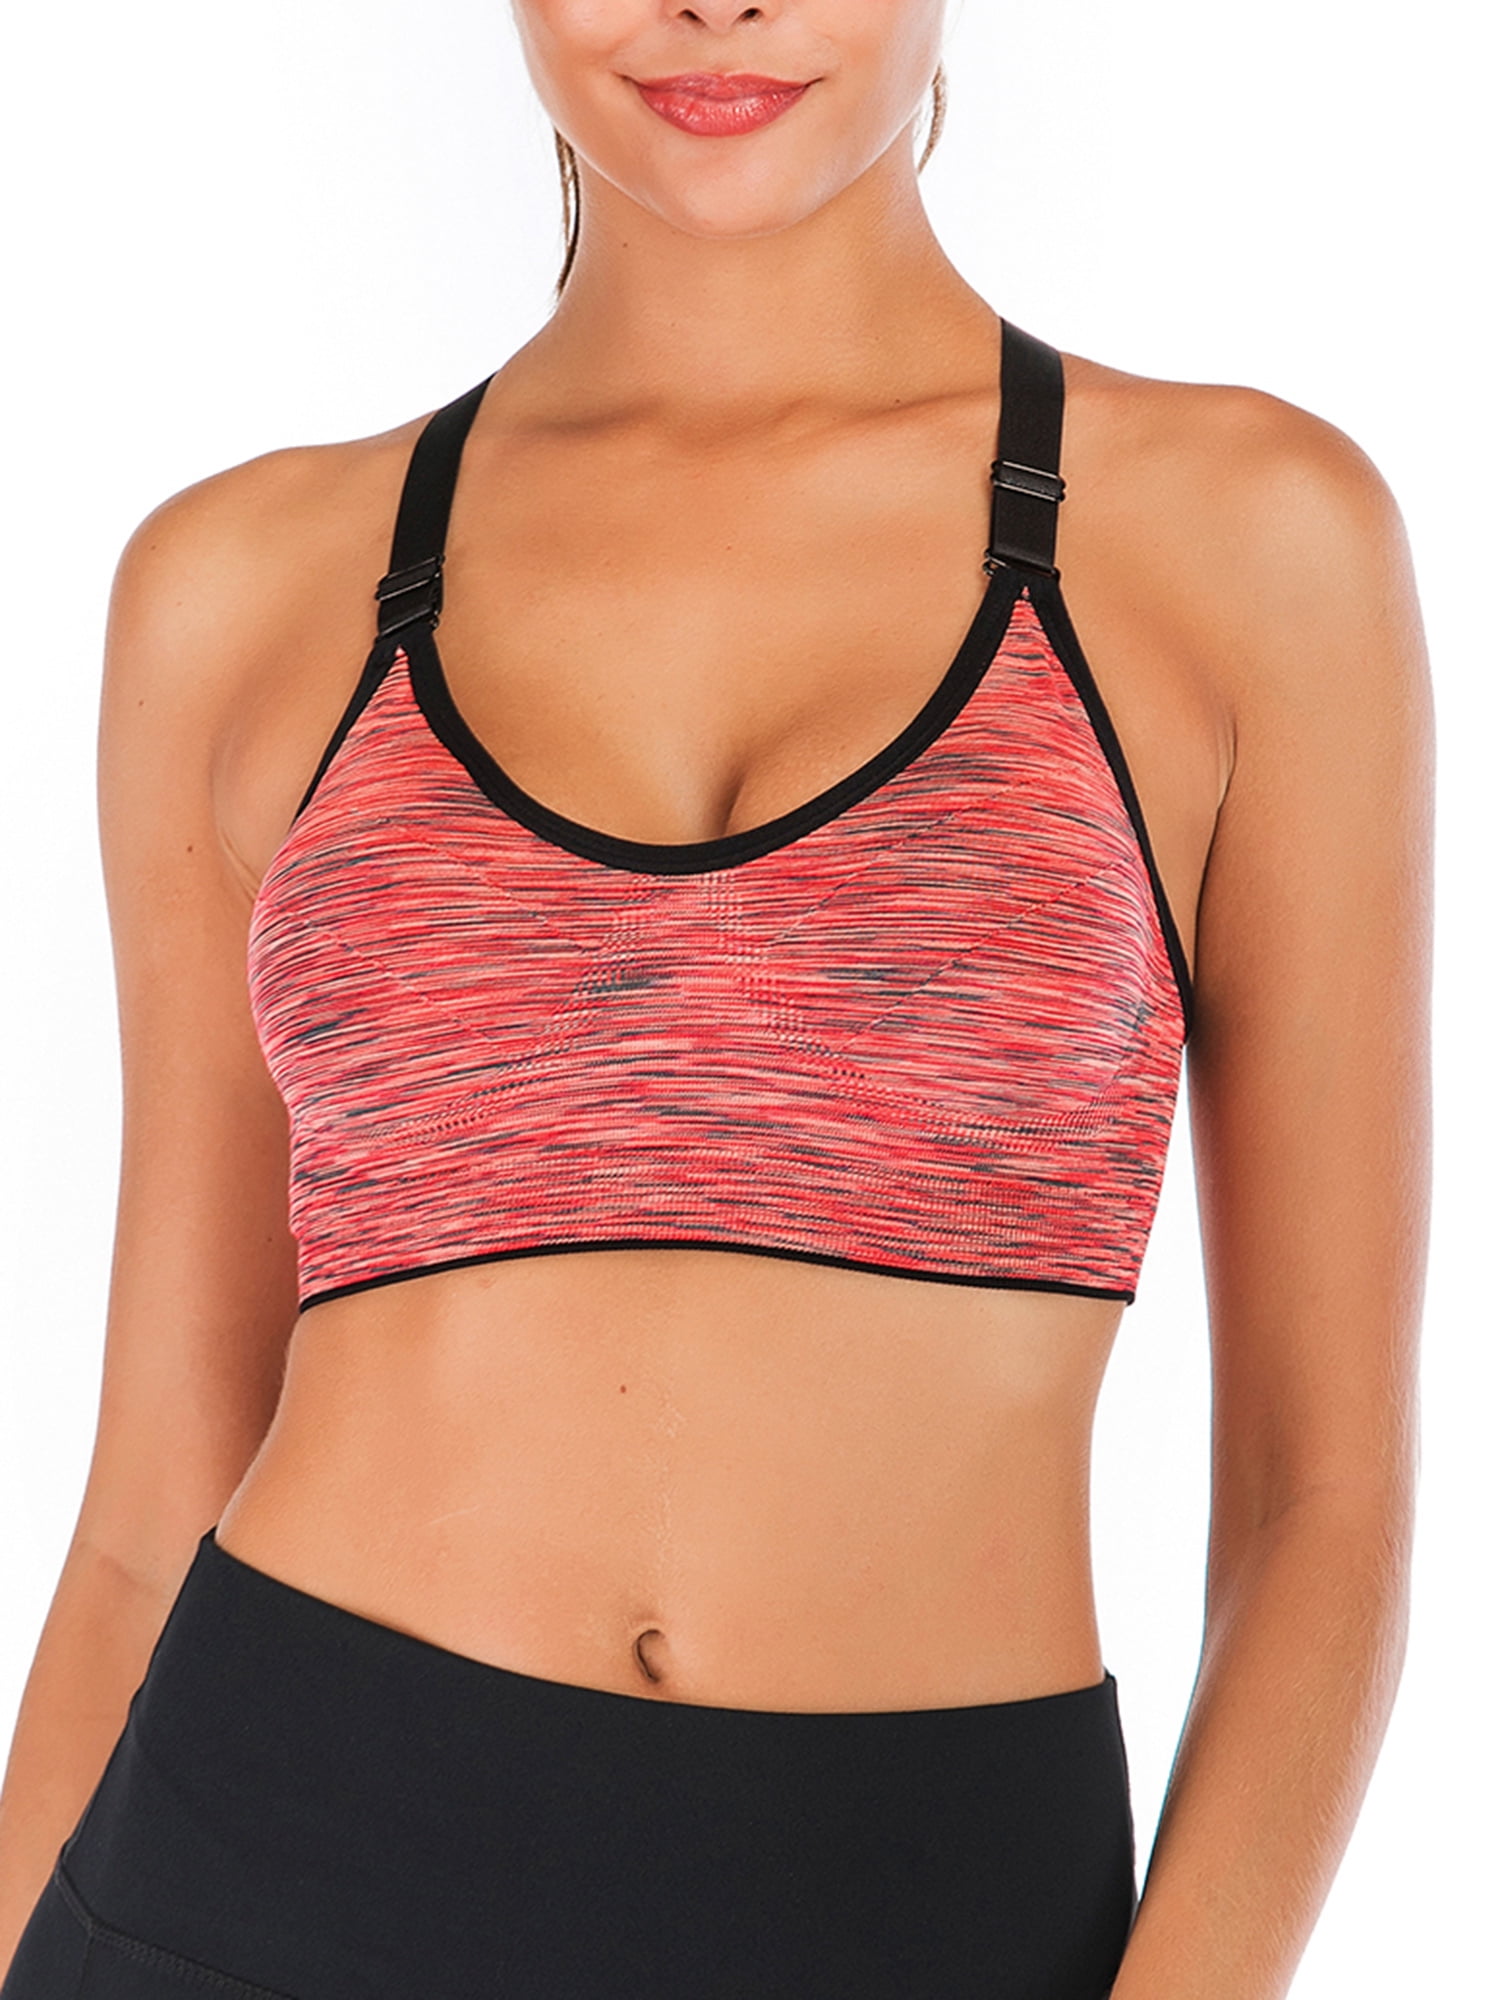 Sexy Sports Bras For Women- Padded Seamless High Impact Support